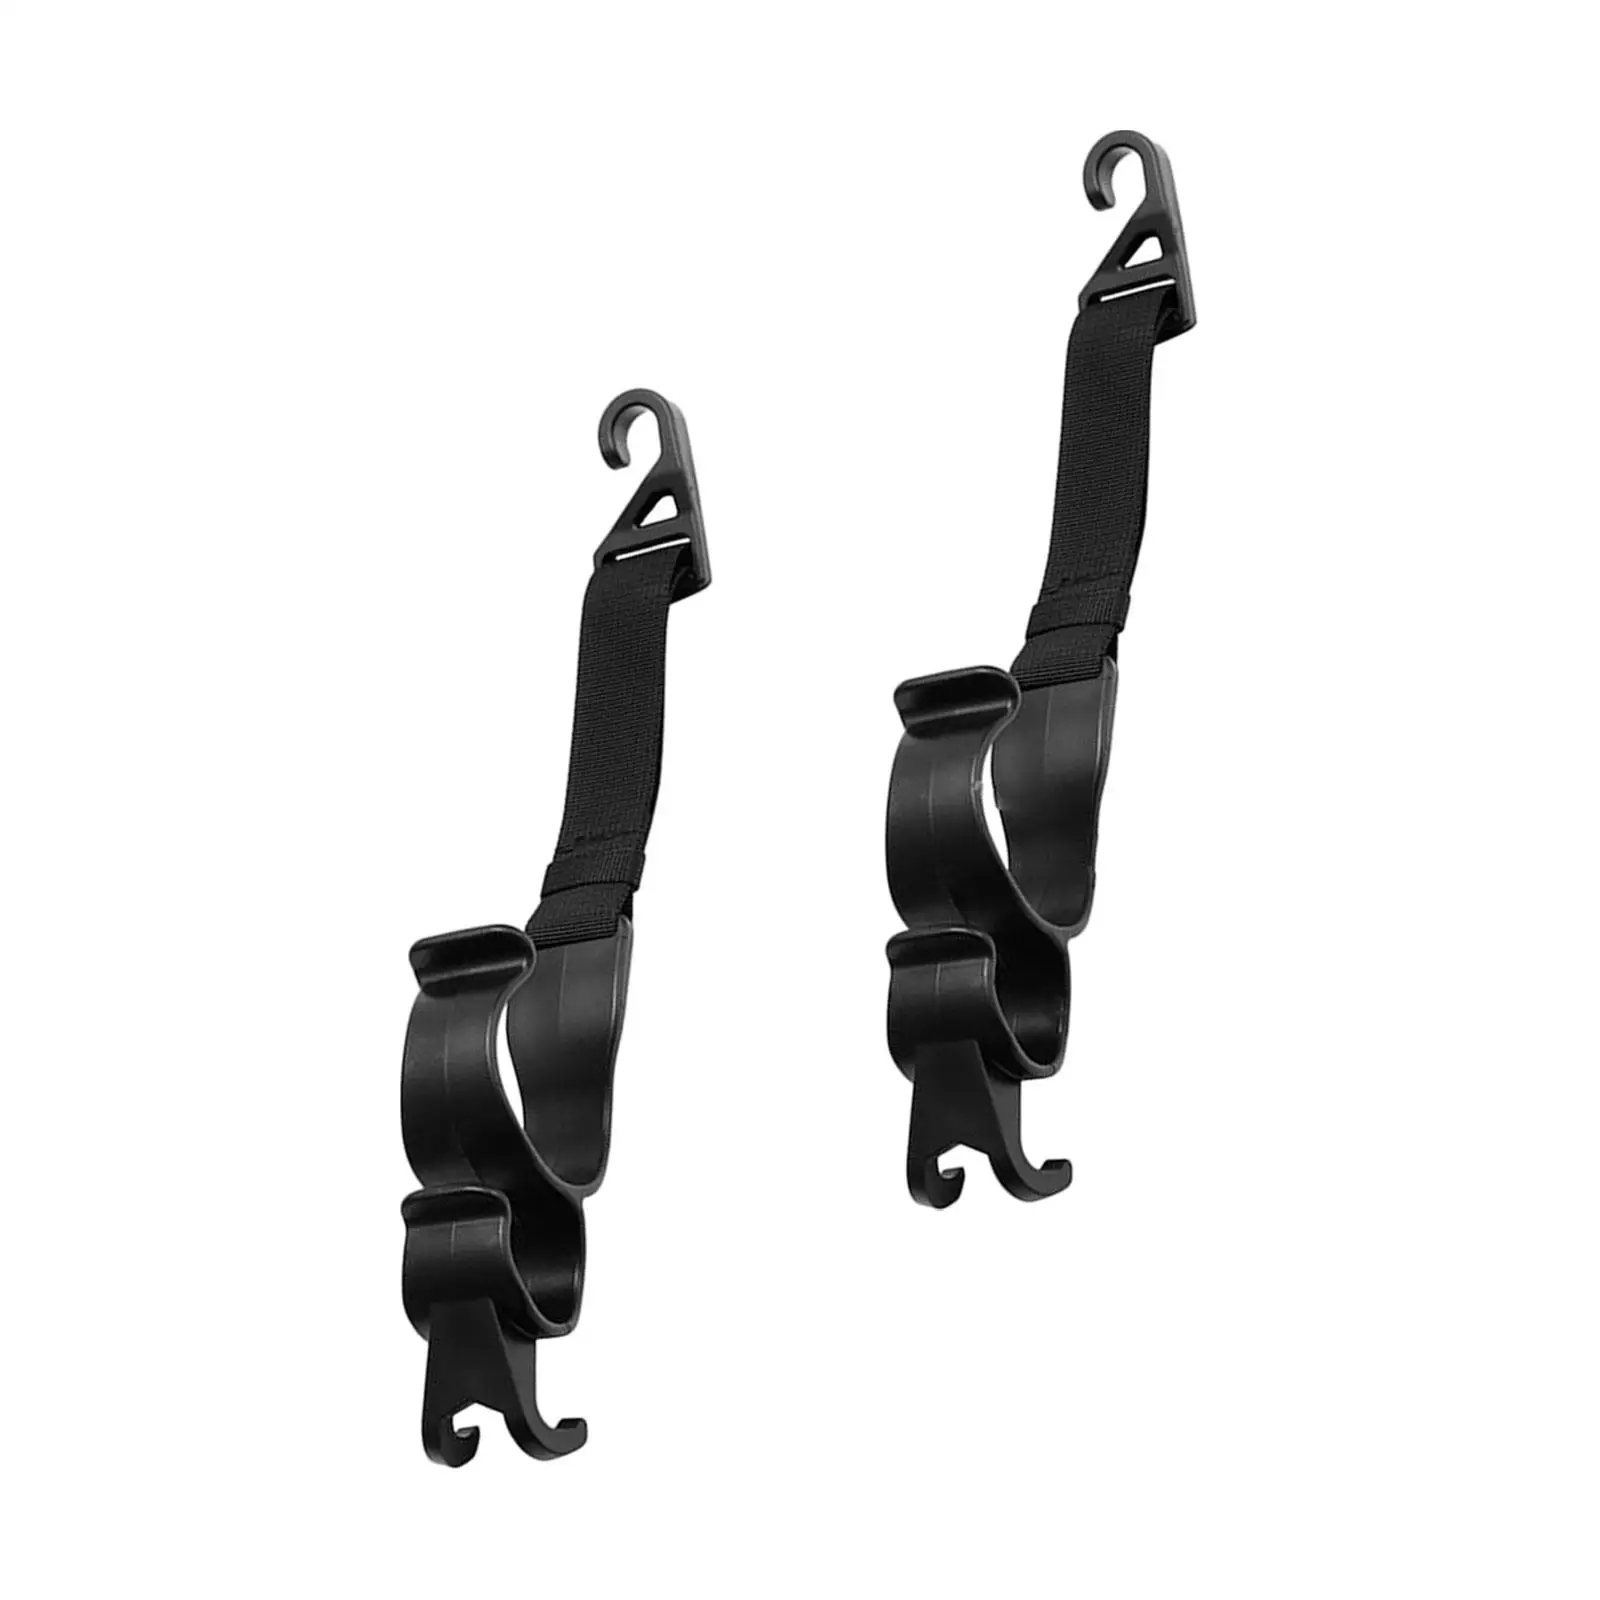 2 Pieces Car Seat Hooks Durable Three hooks Strong Heavy Duty Seat Back Hook Hanger for Hats Backpacks Water Bottles